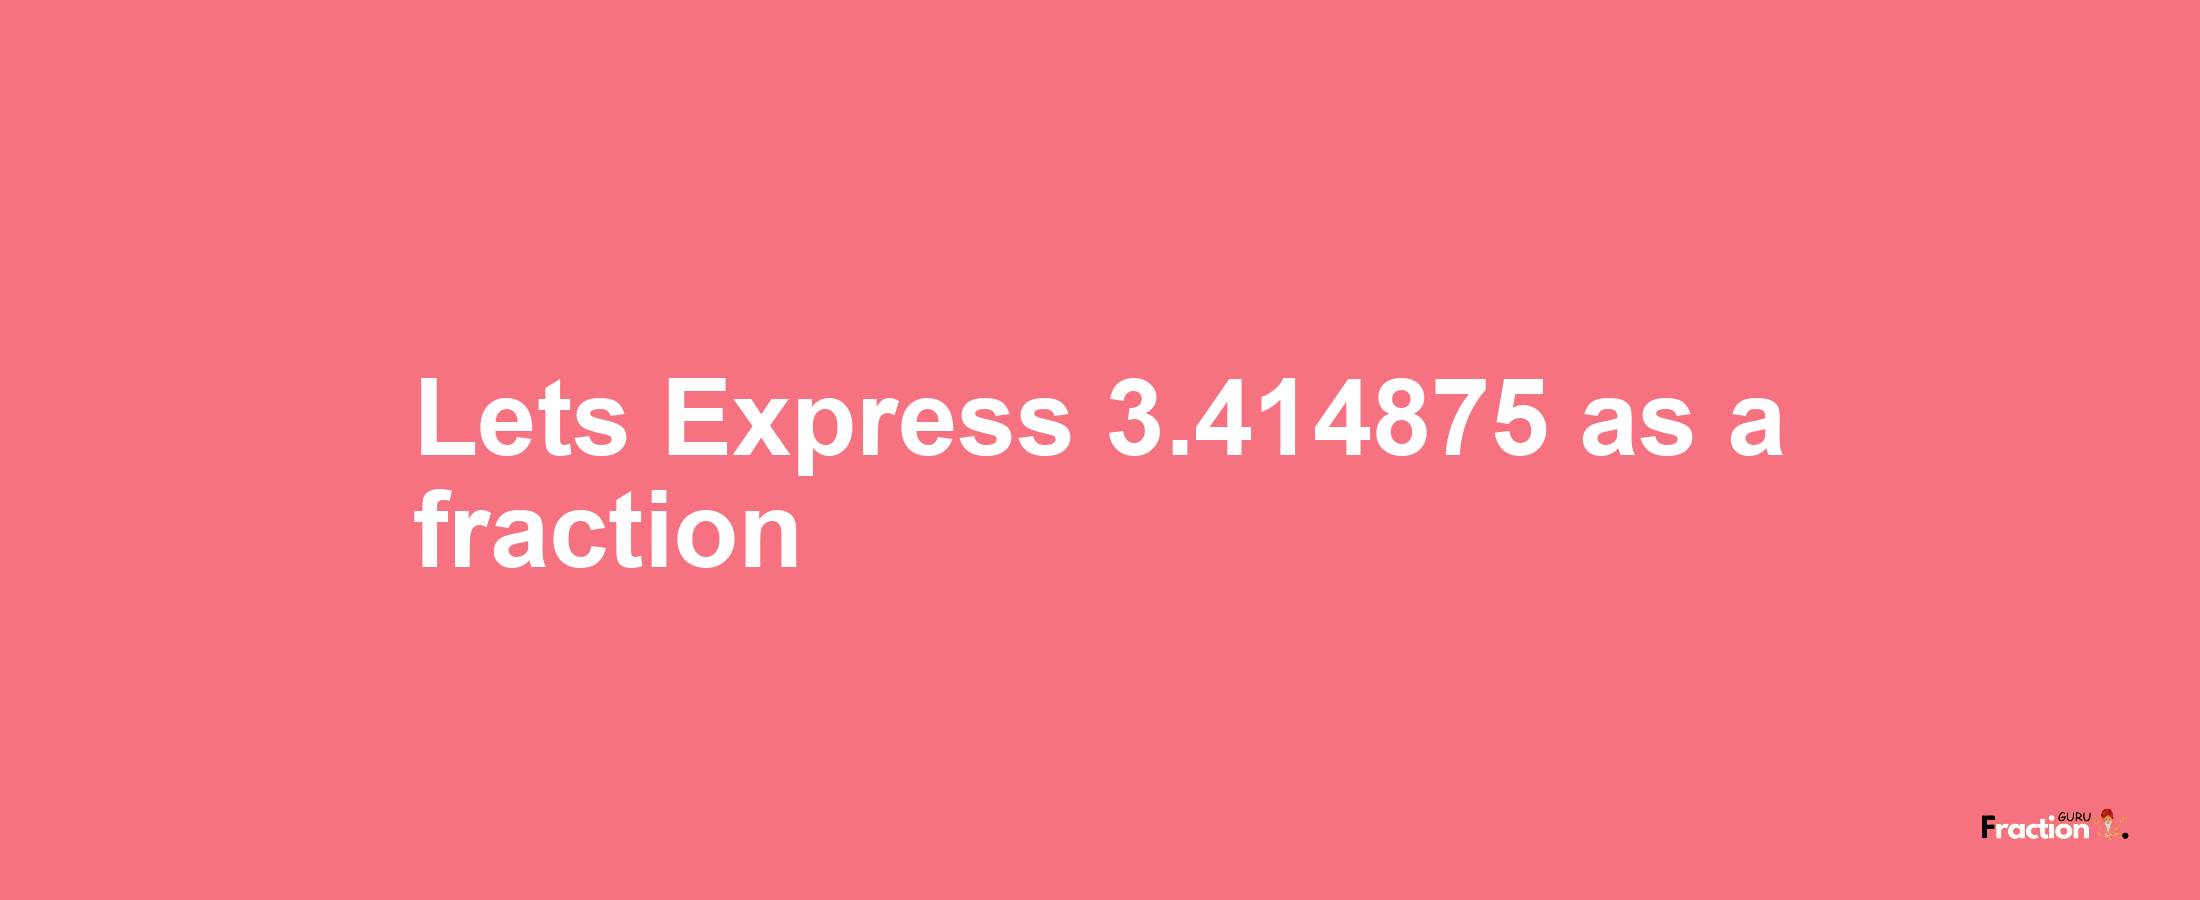 Lets Express 3.414875 as afraction